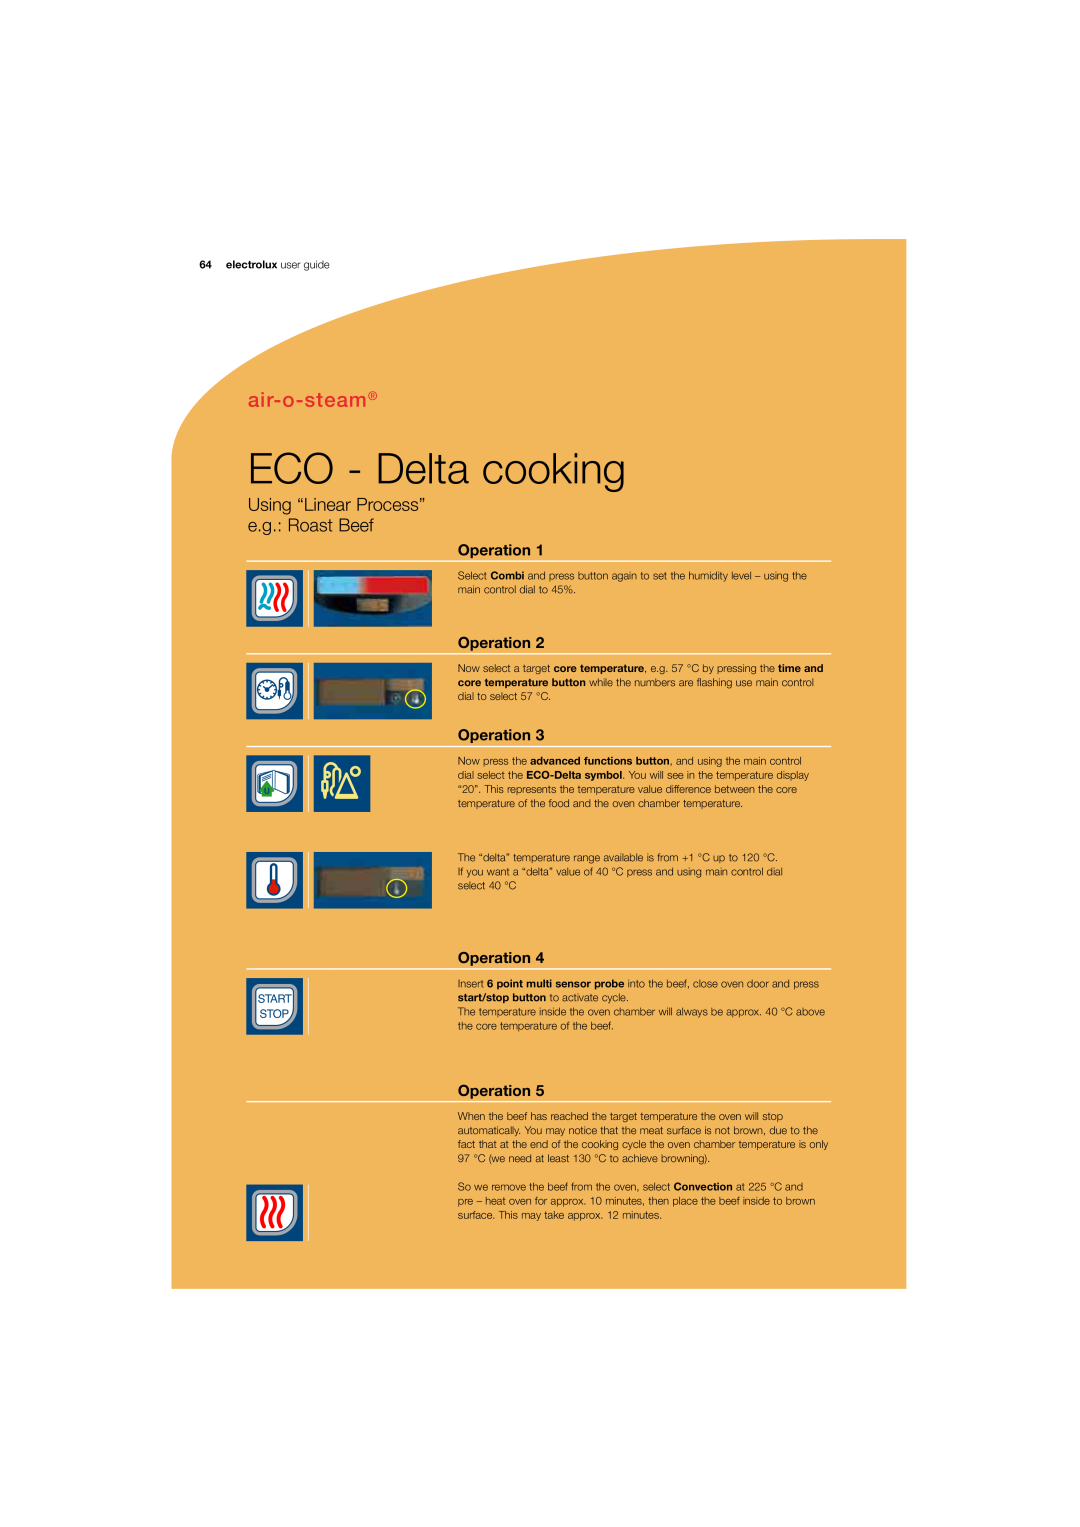 Electrolux 180 manual ECO - Delta cooking, air-o-steam, Using “Linear Process” e.g. Roast Beef, Operation, Start Stop 